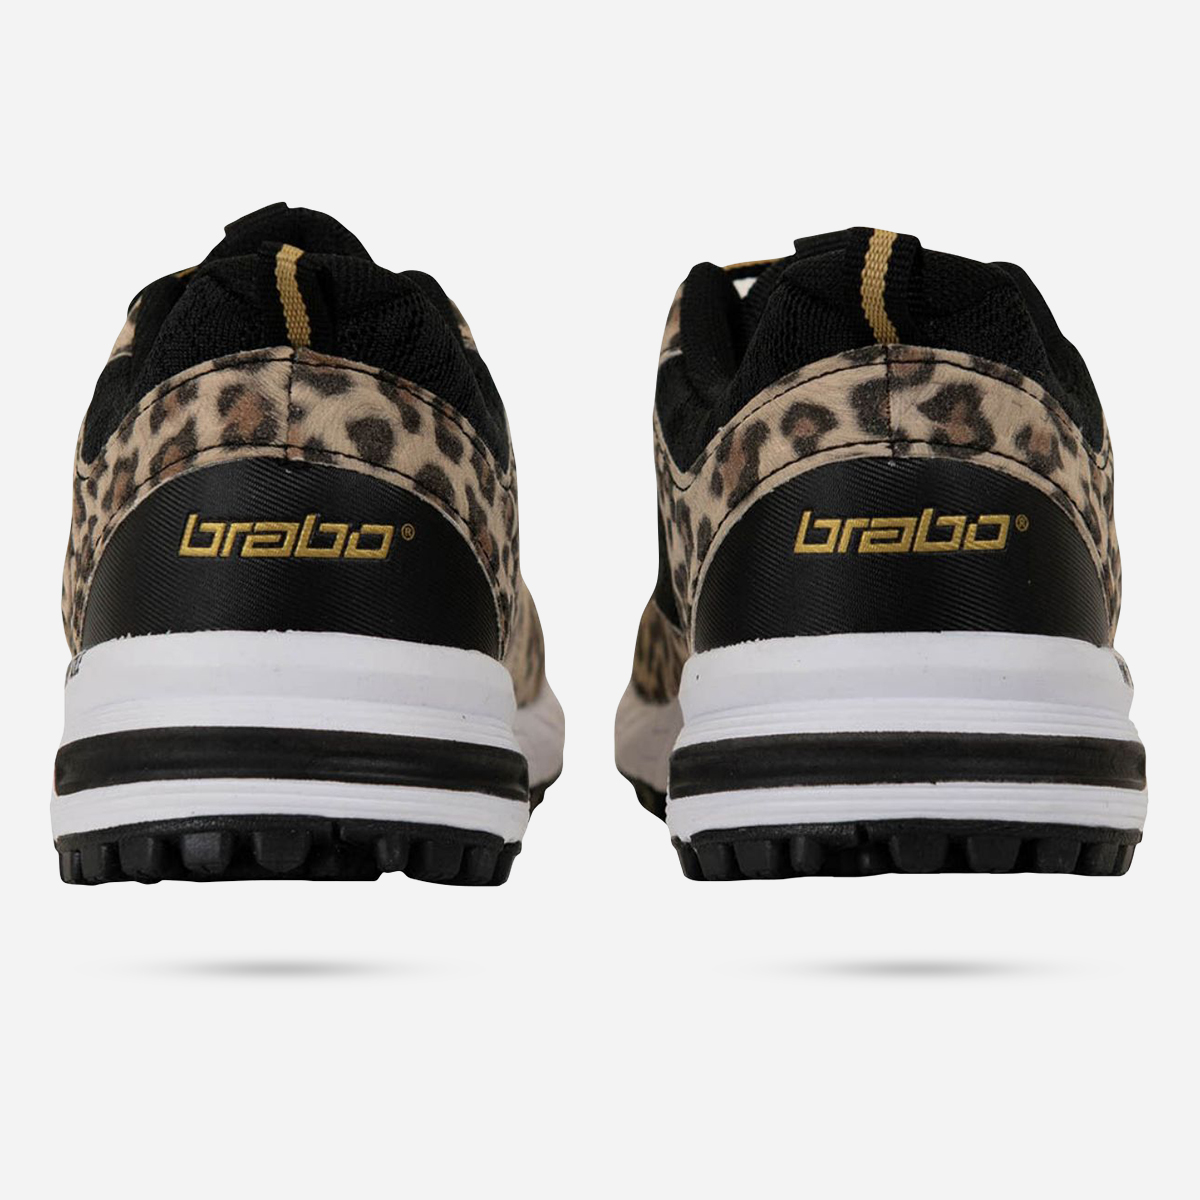 AN273144 Bf1031h Shoes Tribute Leopard